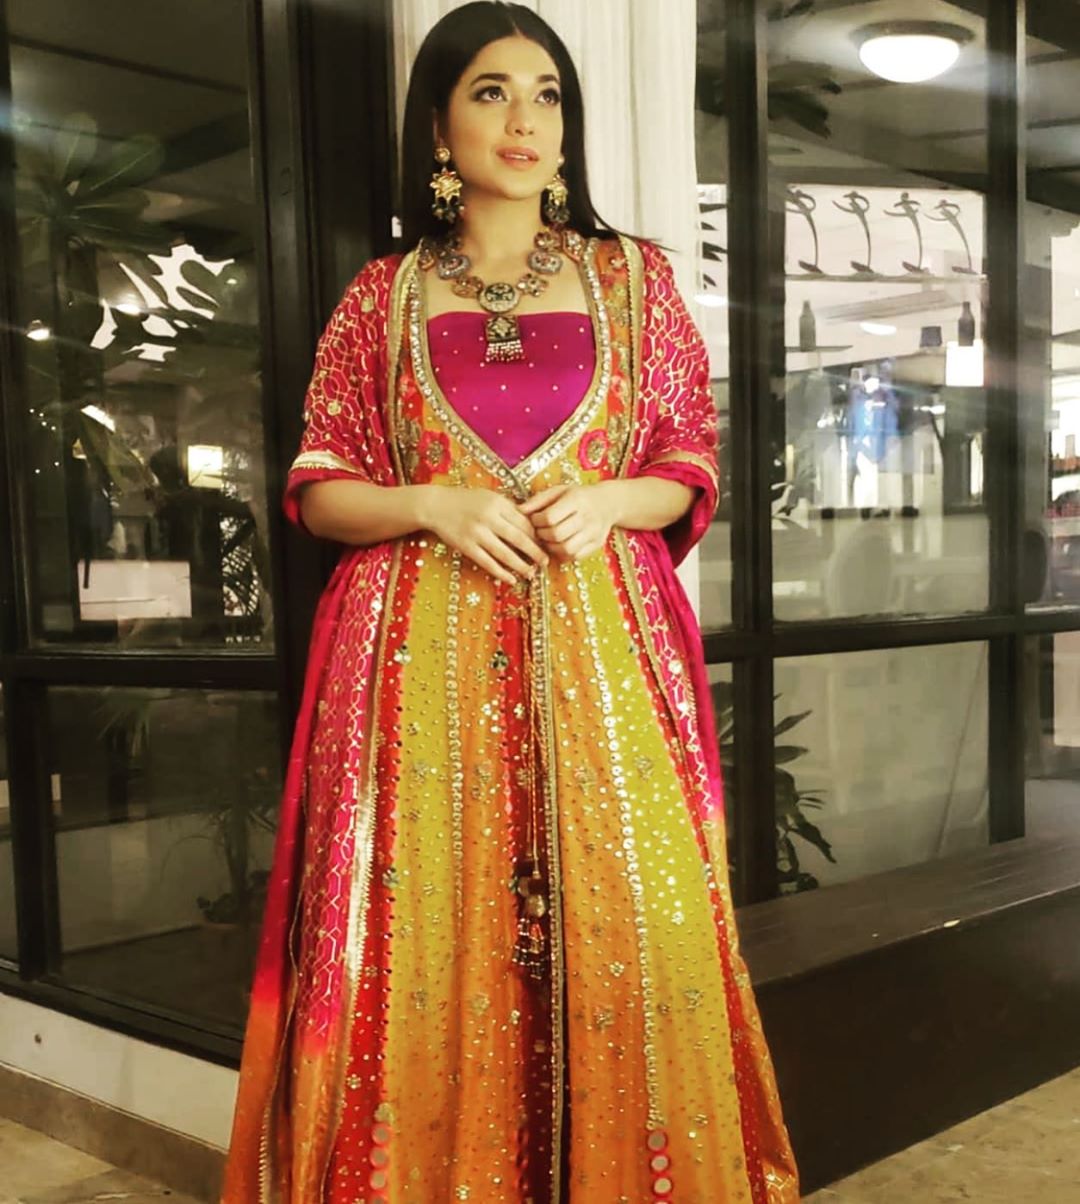 Sanam Jung Beautiful Clicks from a Recent Family Wedding